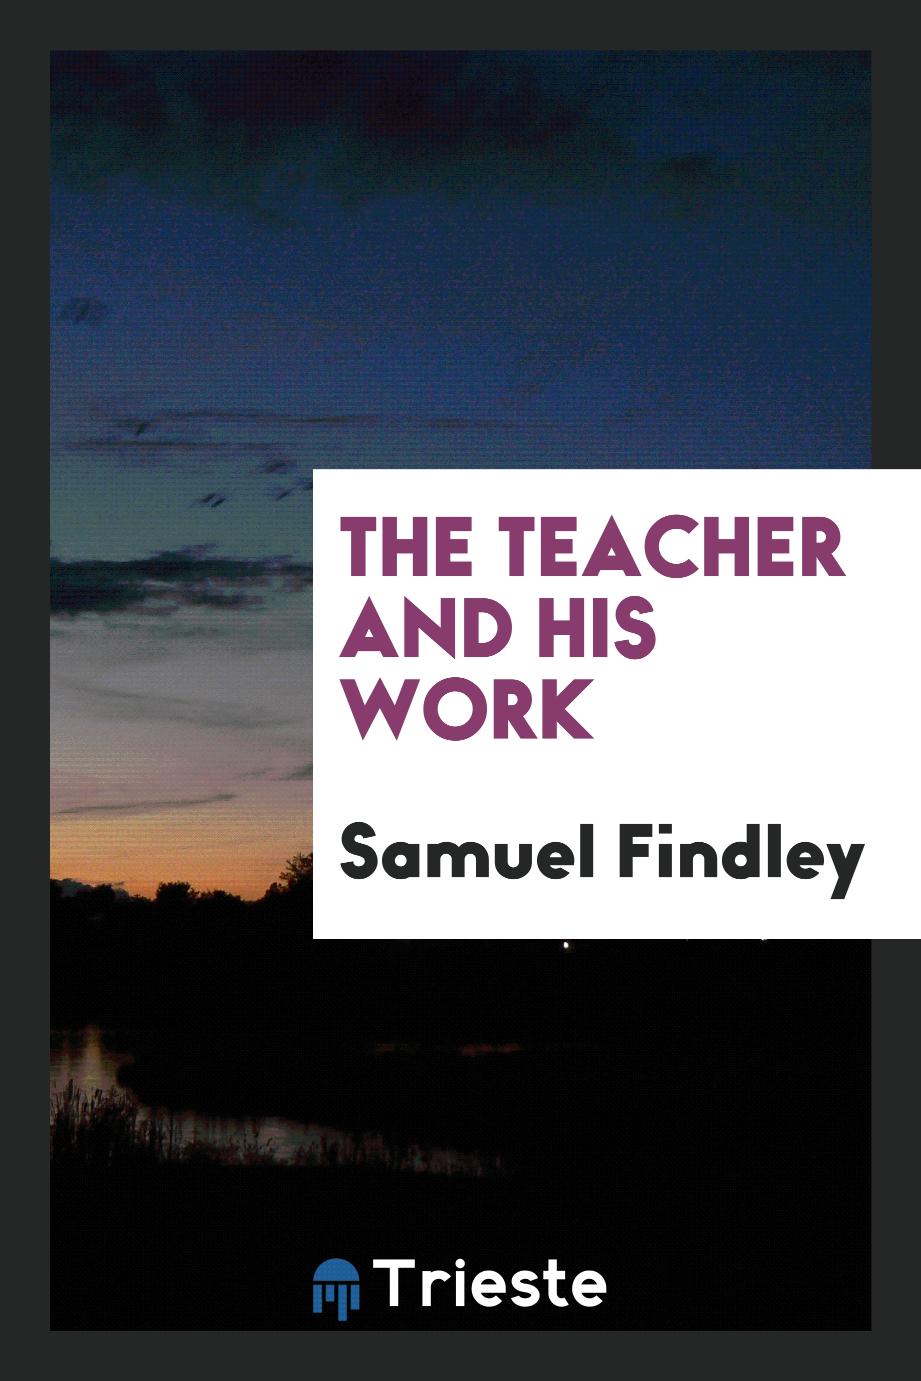 The teacher and his work